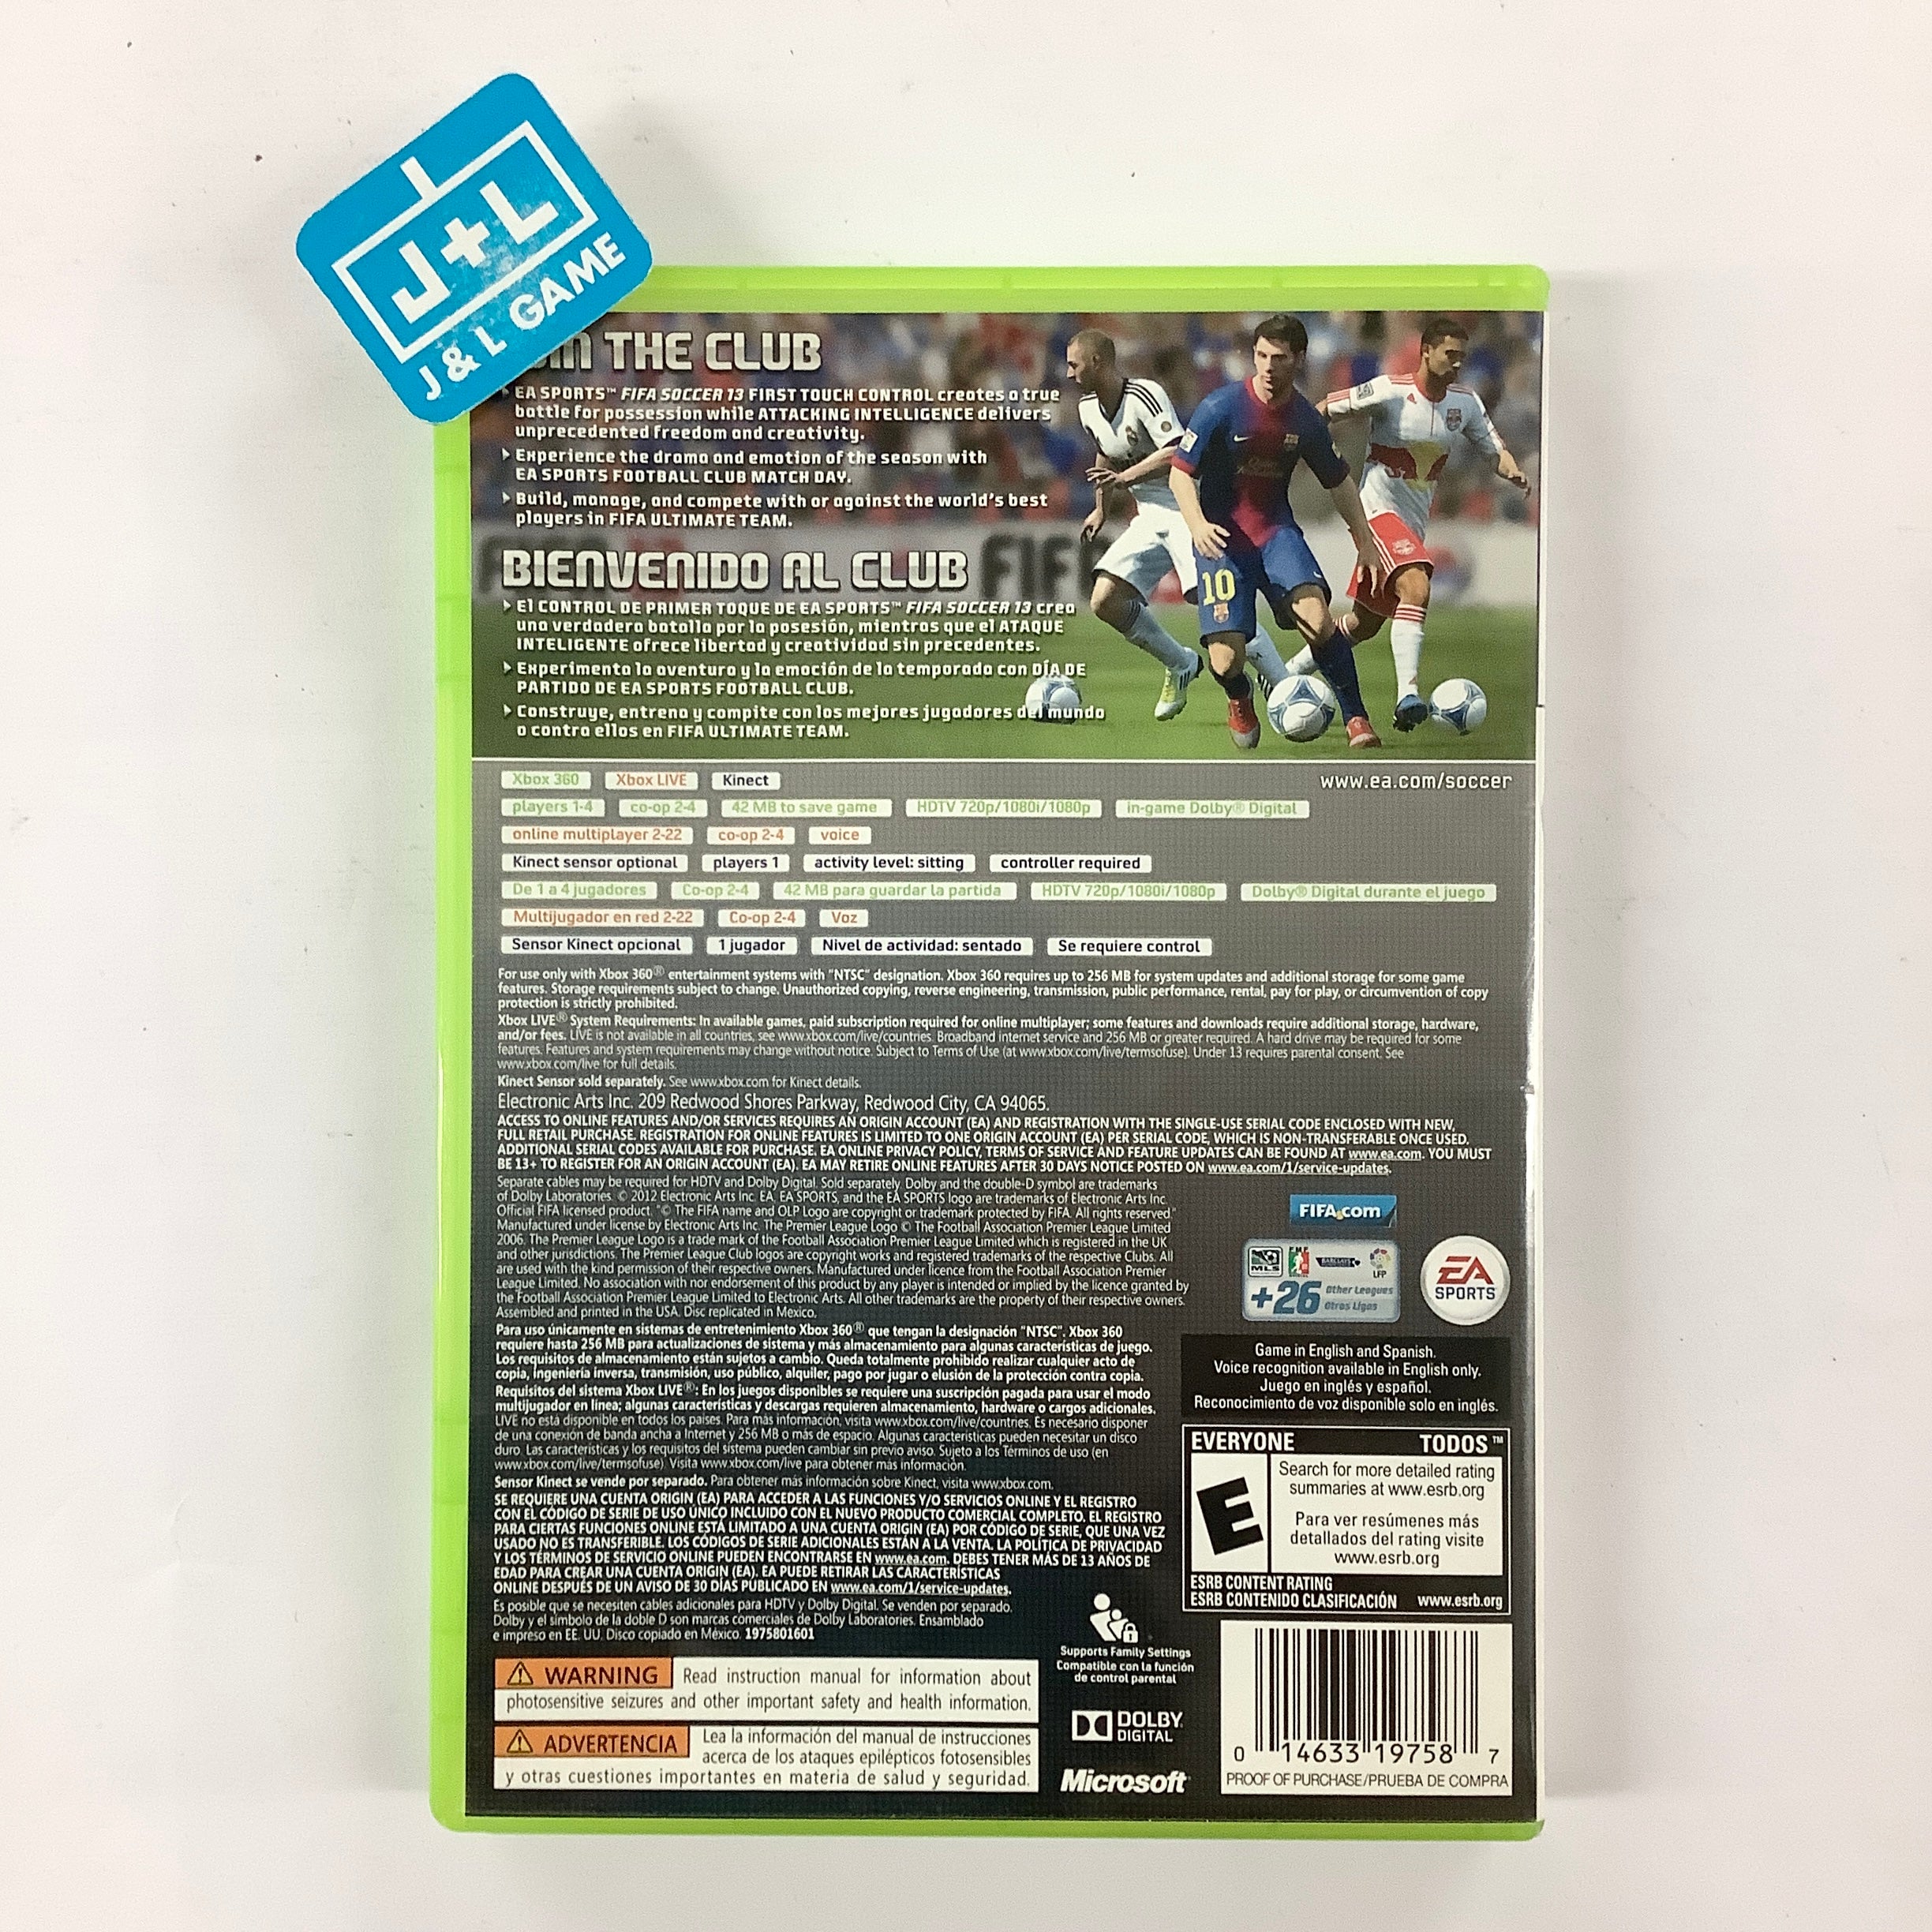 FIFA Soccer 13 - Xbox 360 [Pre-Owned] Video Games Electronic Arts   